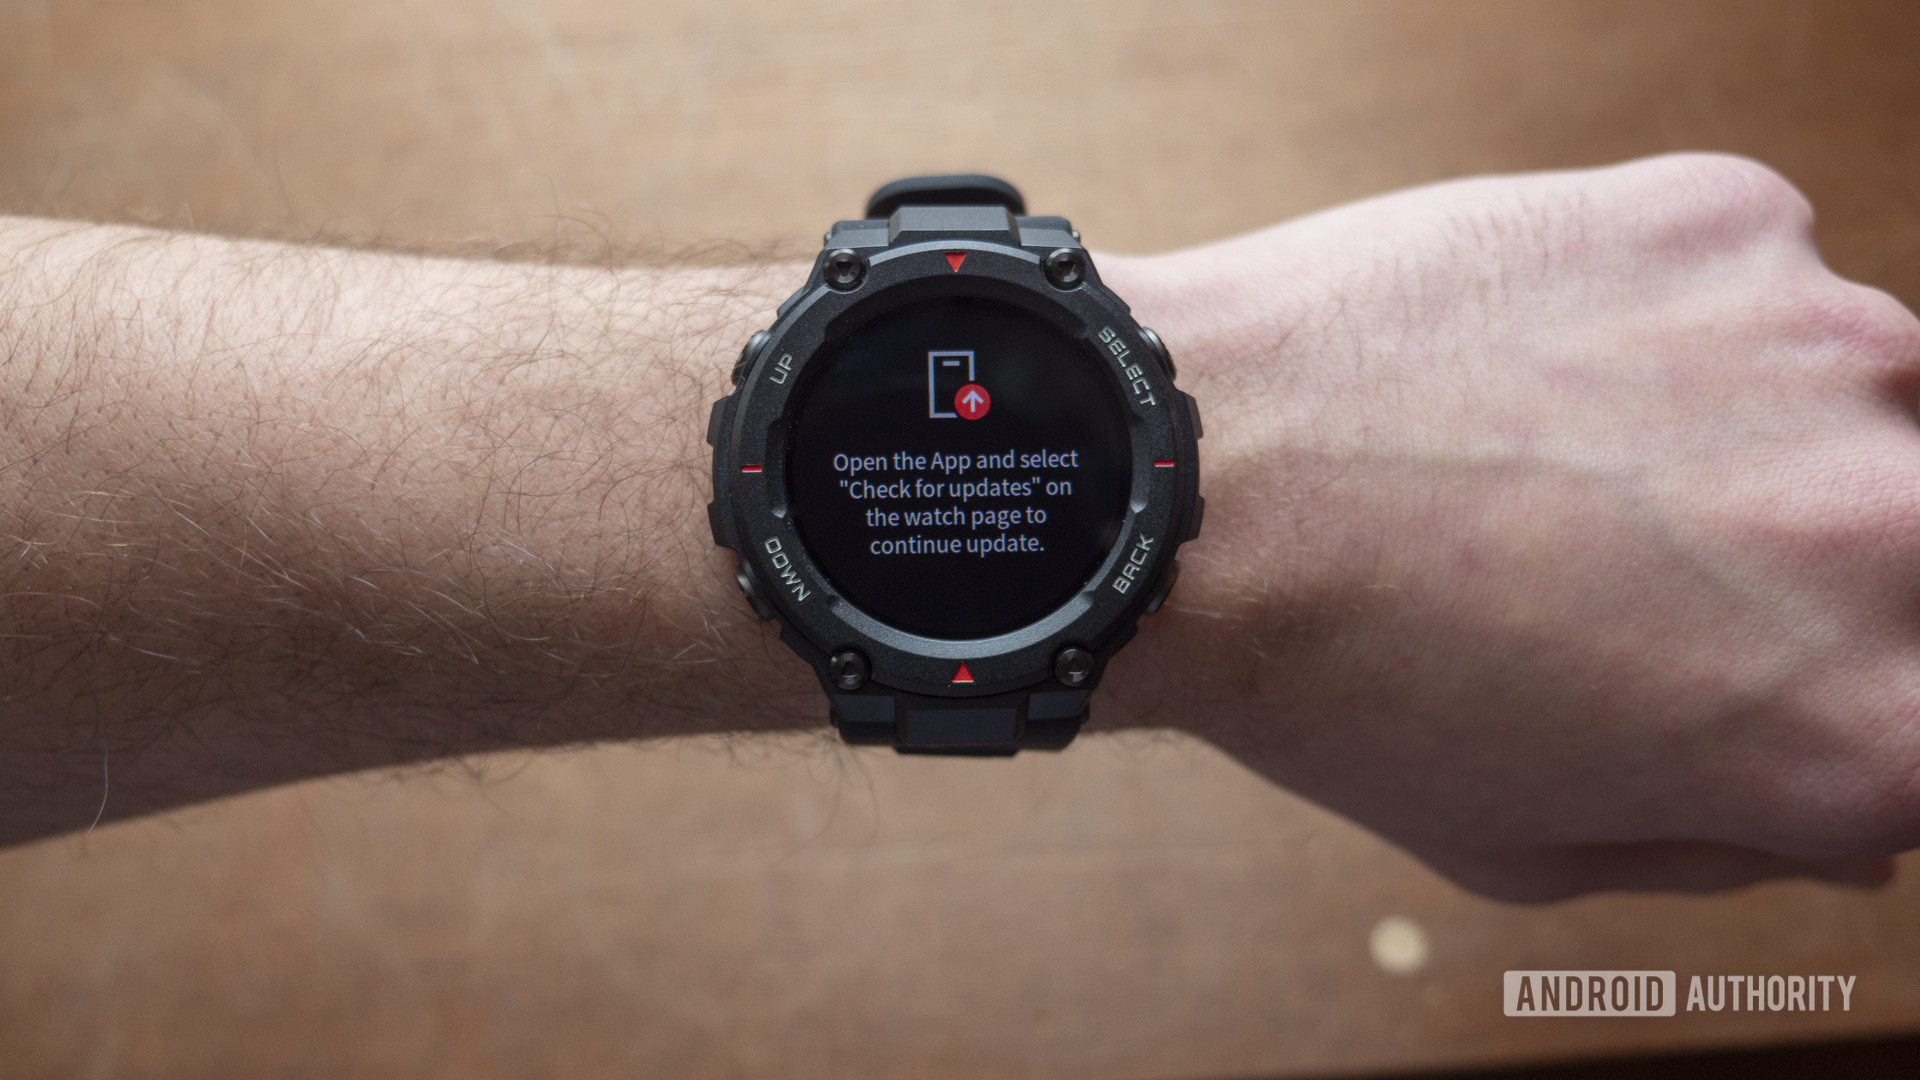 huami amazfit t rex smartwatch open the app and select check for updates display message on wrist